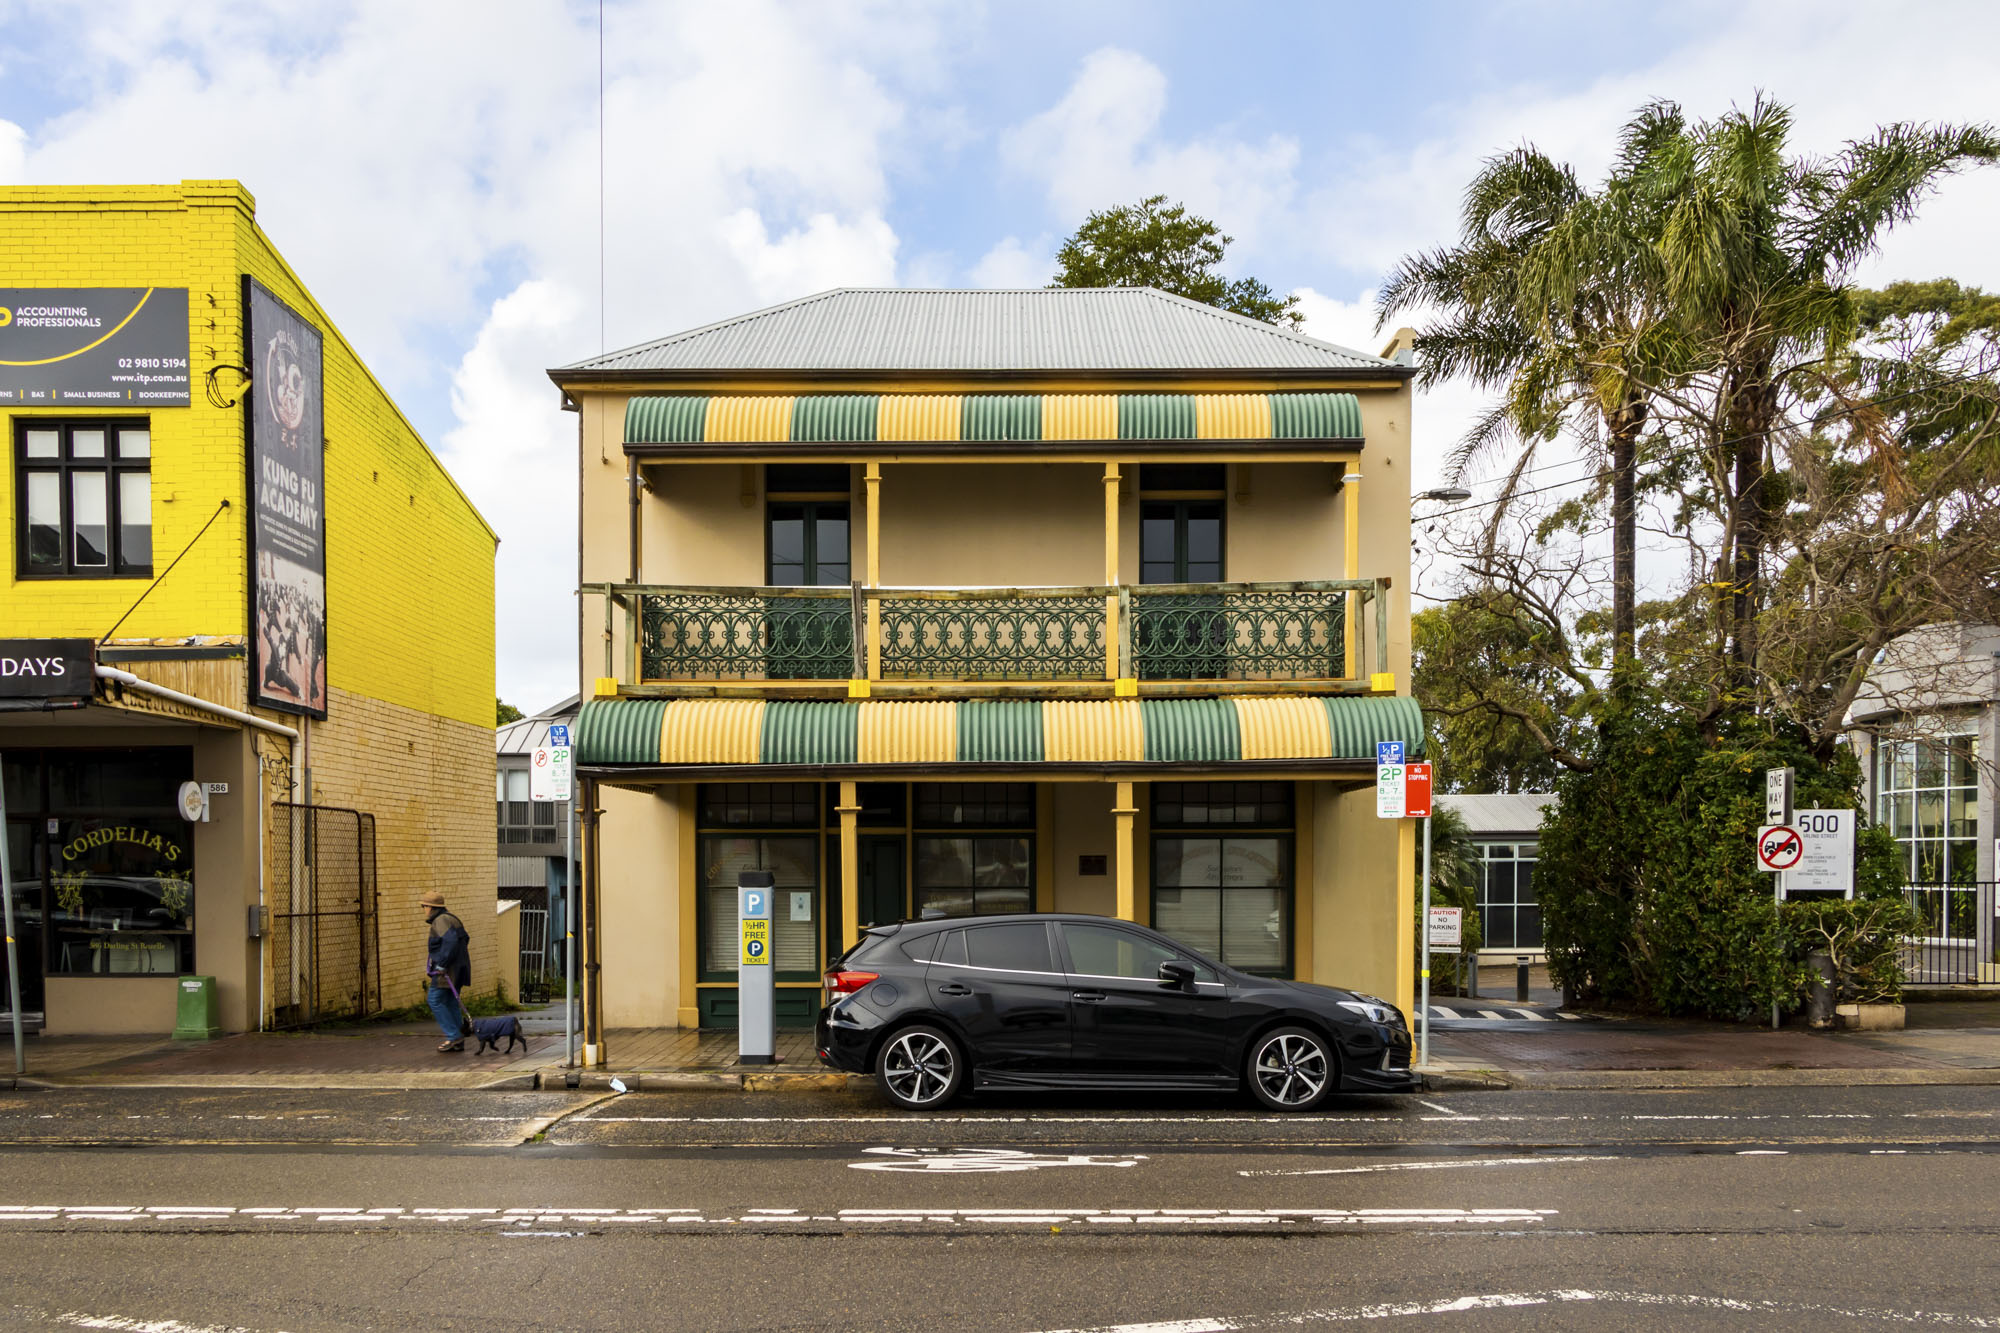 Image 4 of Photo Walk at Sydney Streets of Rozelle and Balmain